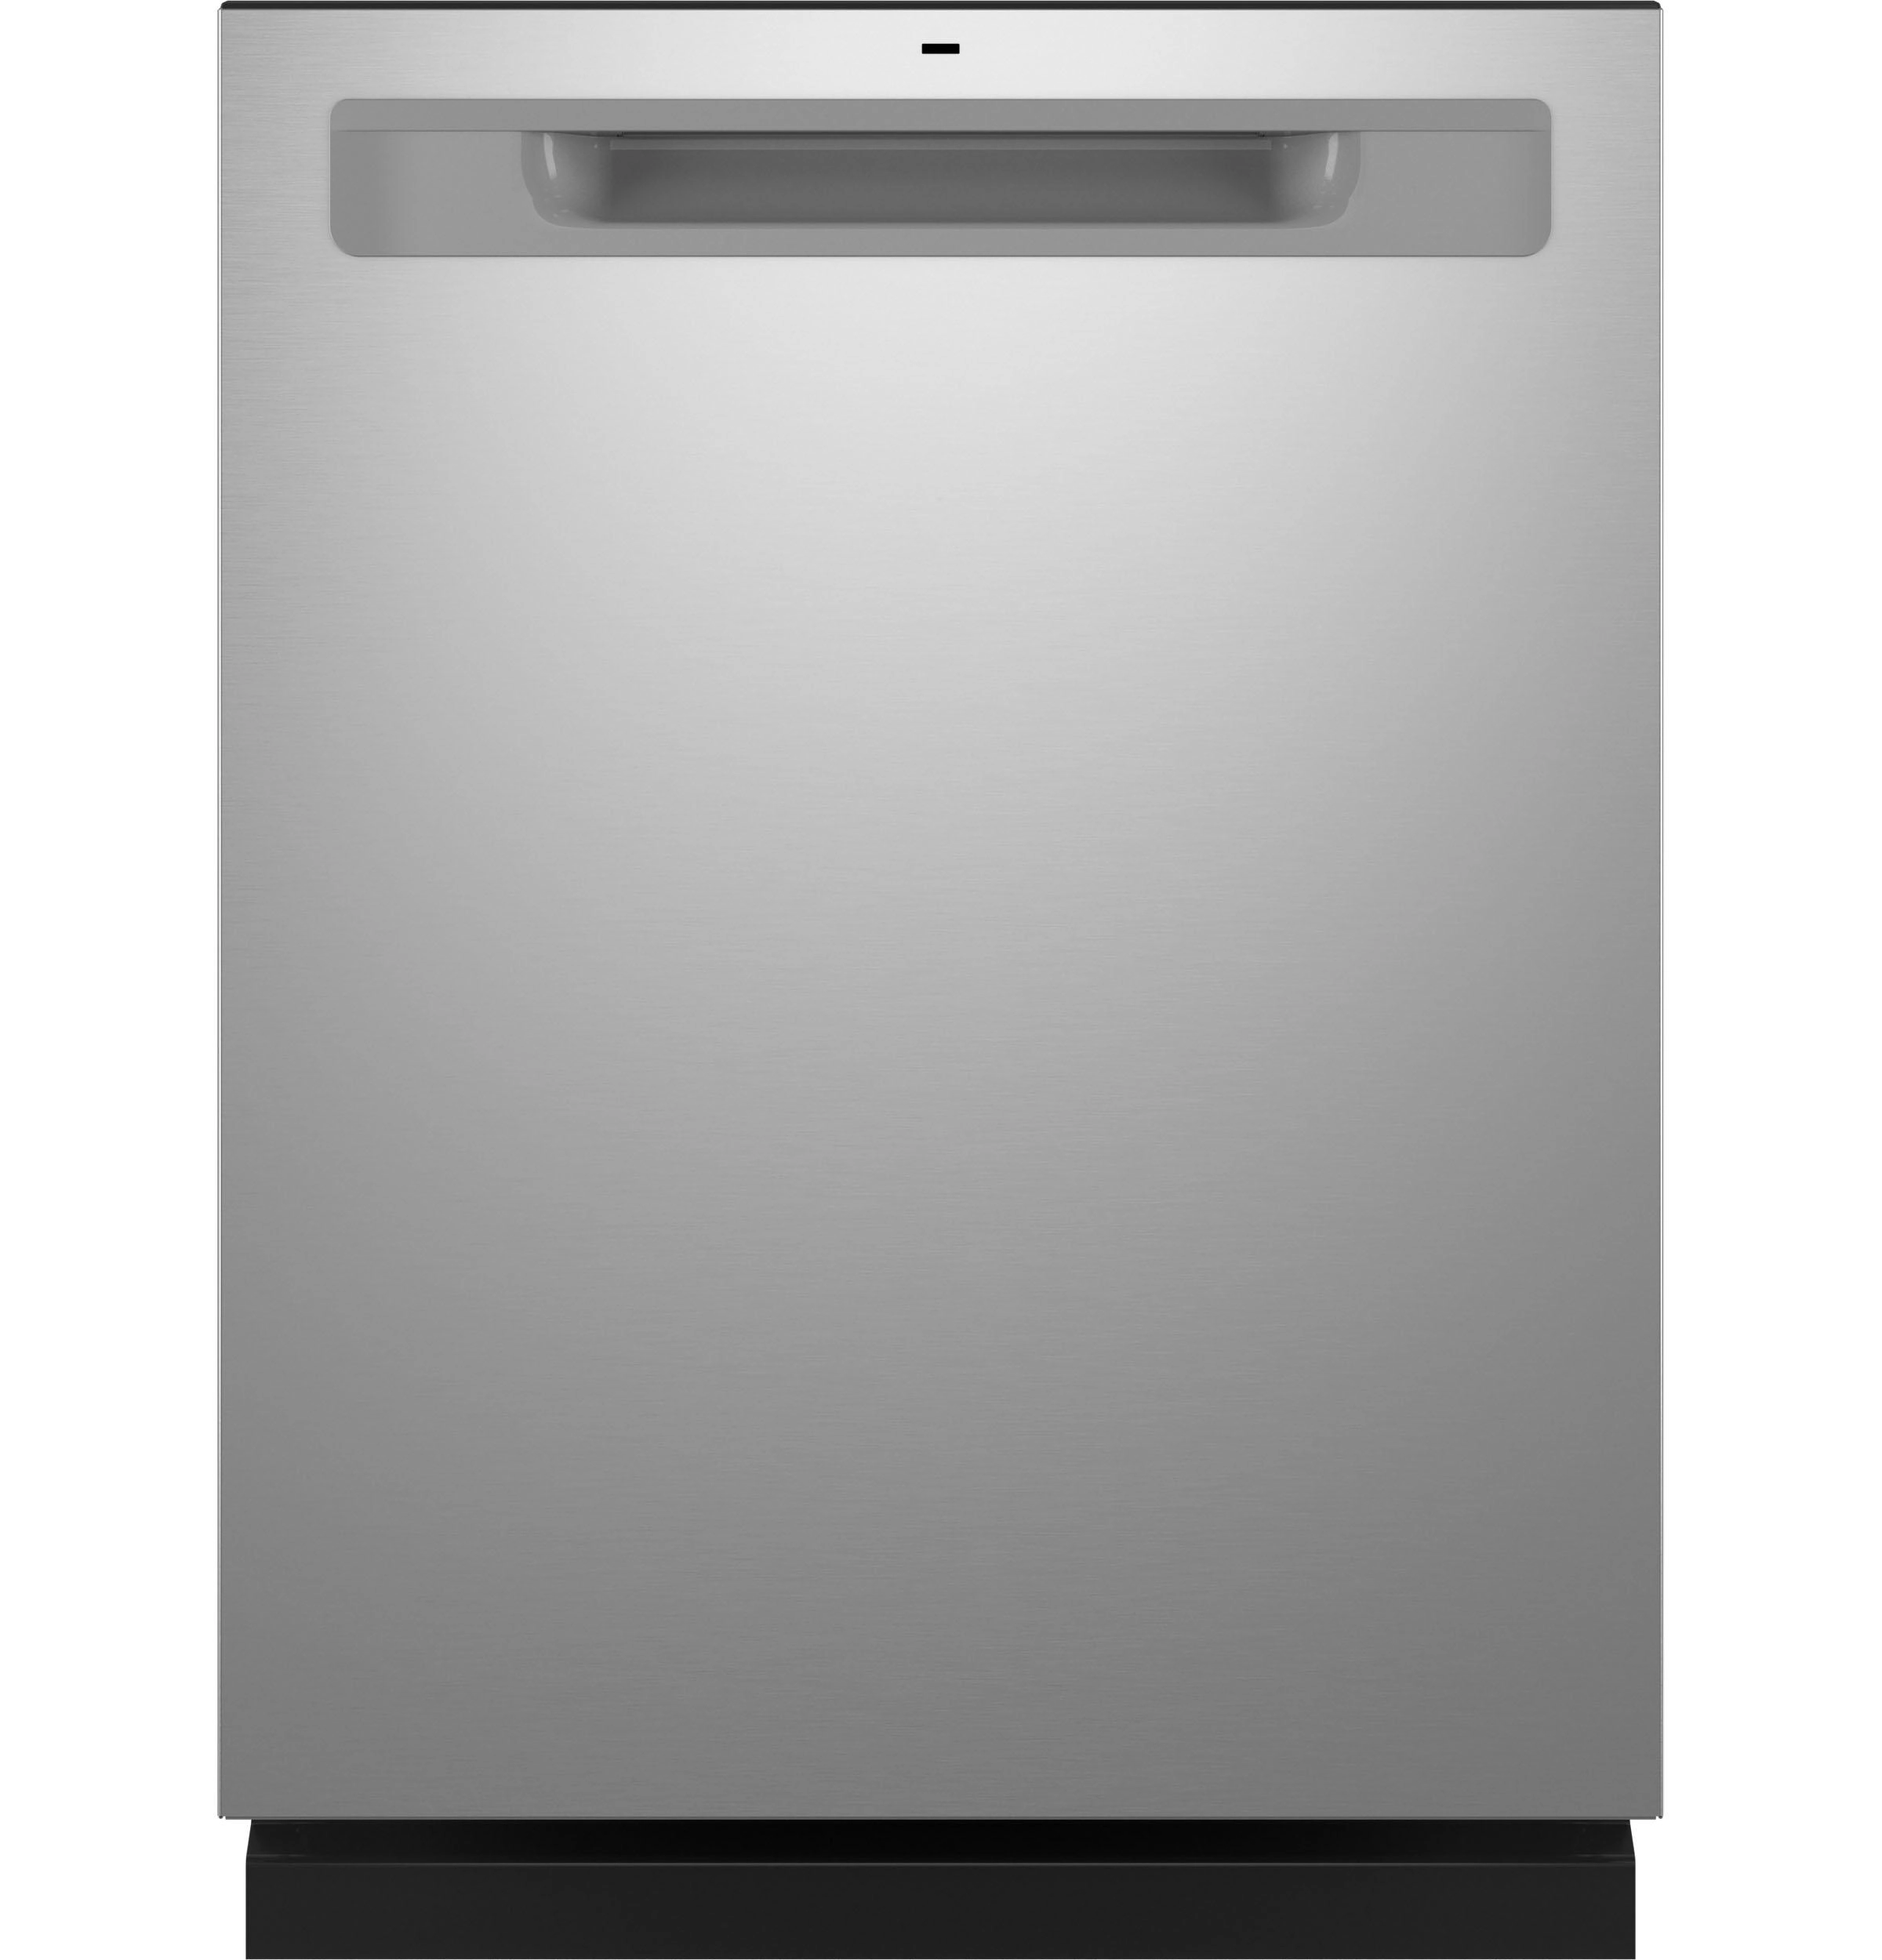 General Electric Built In Dishwasher with Pocket Controls 600 Series Wash System Plastic Interior Material Fingerprint Resistant Stainless